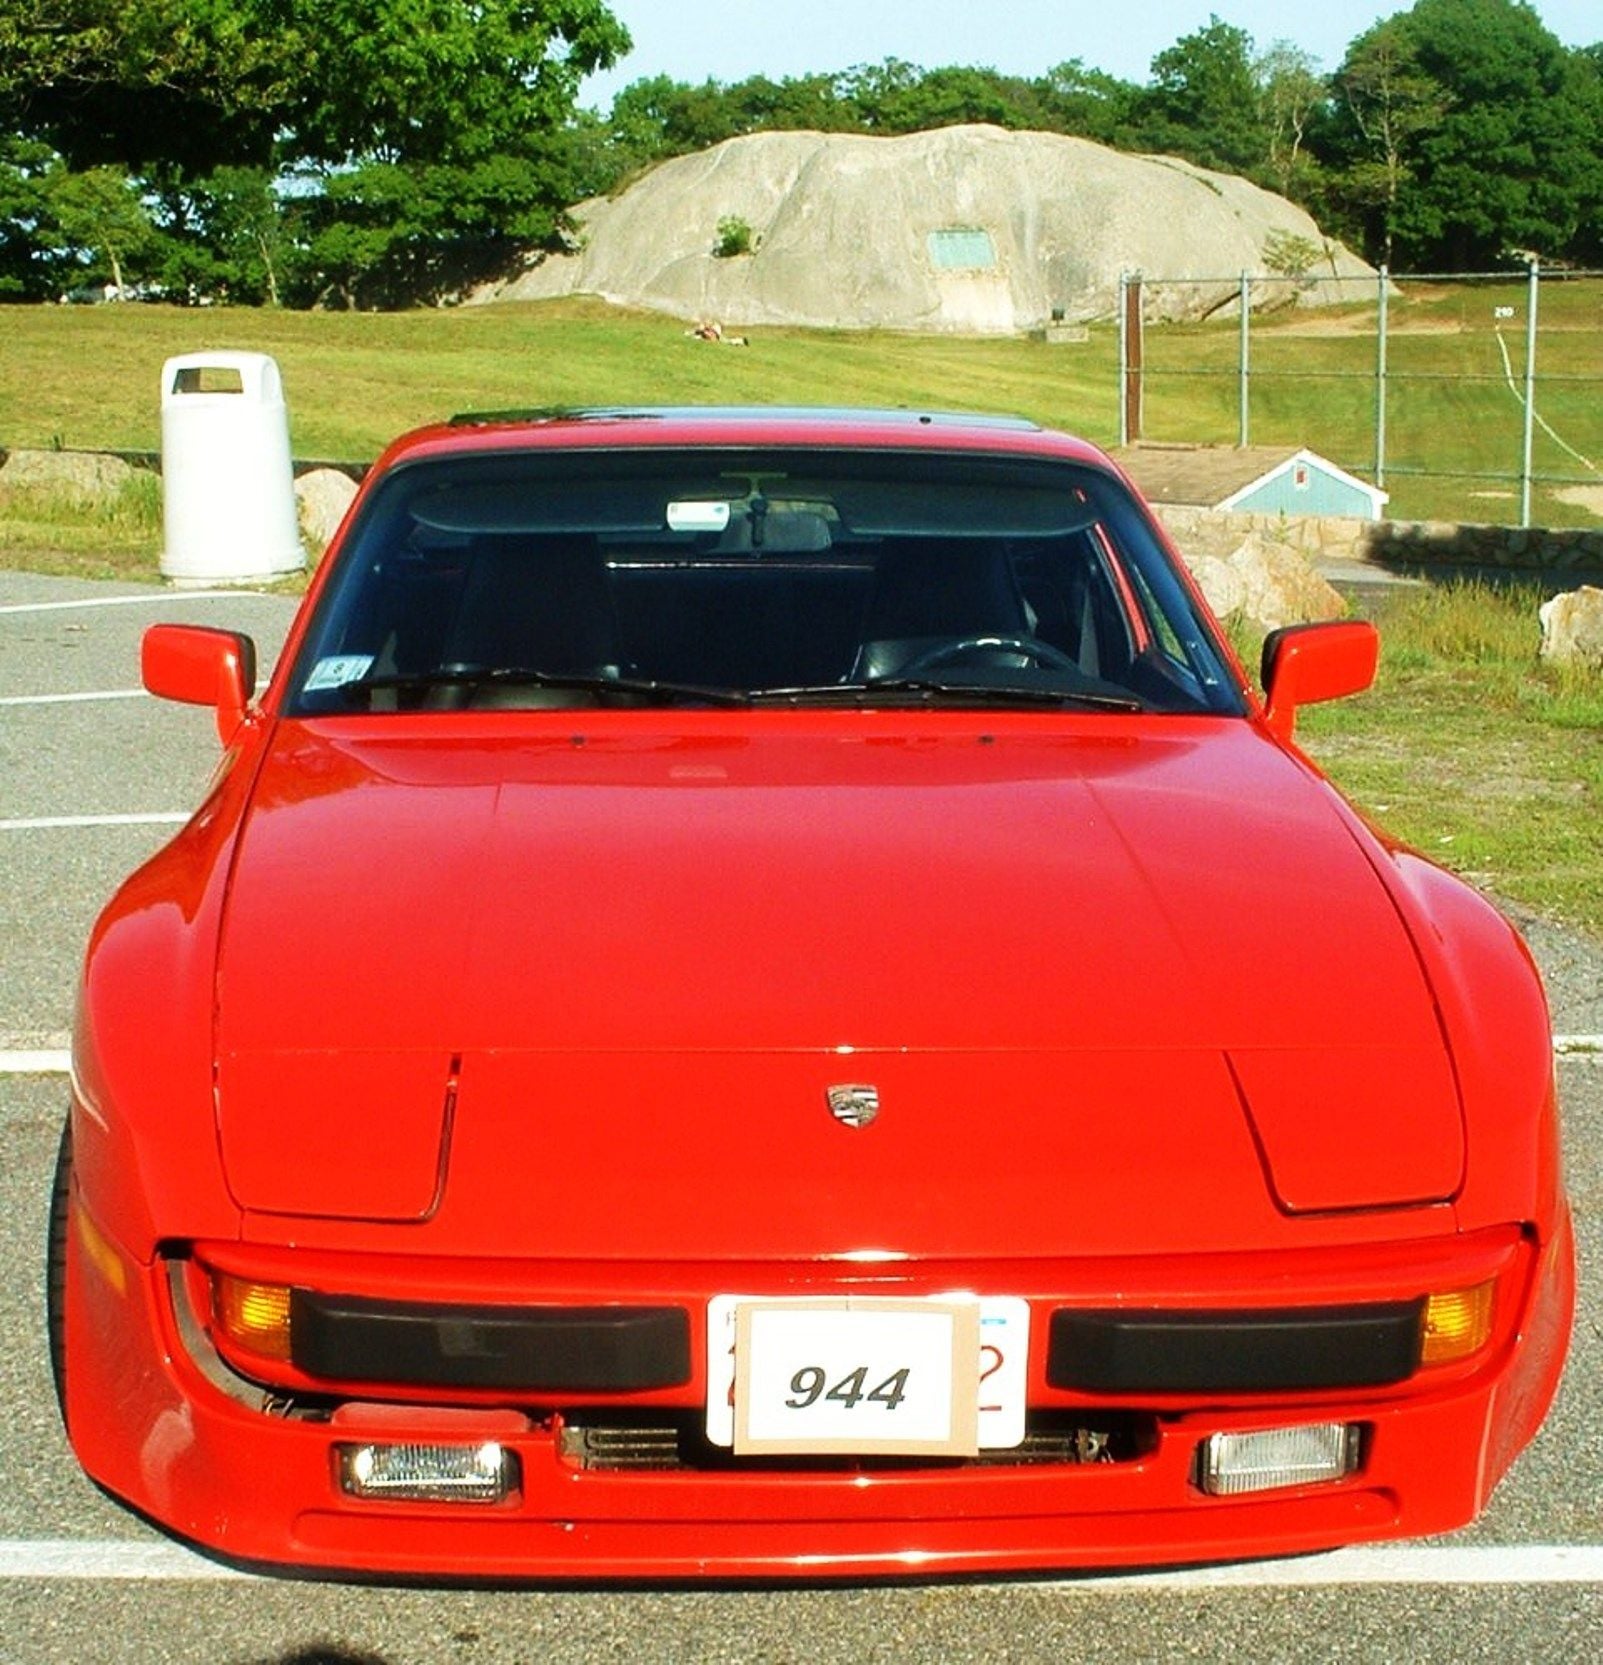 1985 Porsche 944 A one owner since new with 117,000 miles